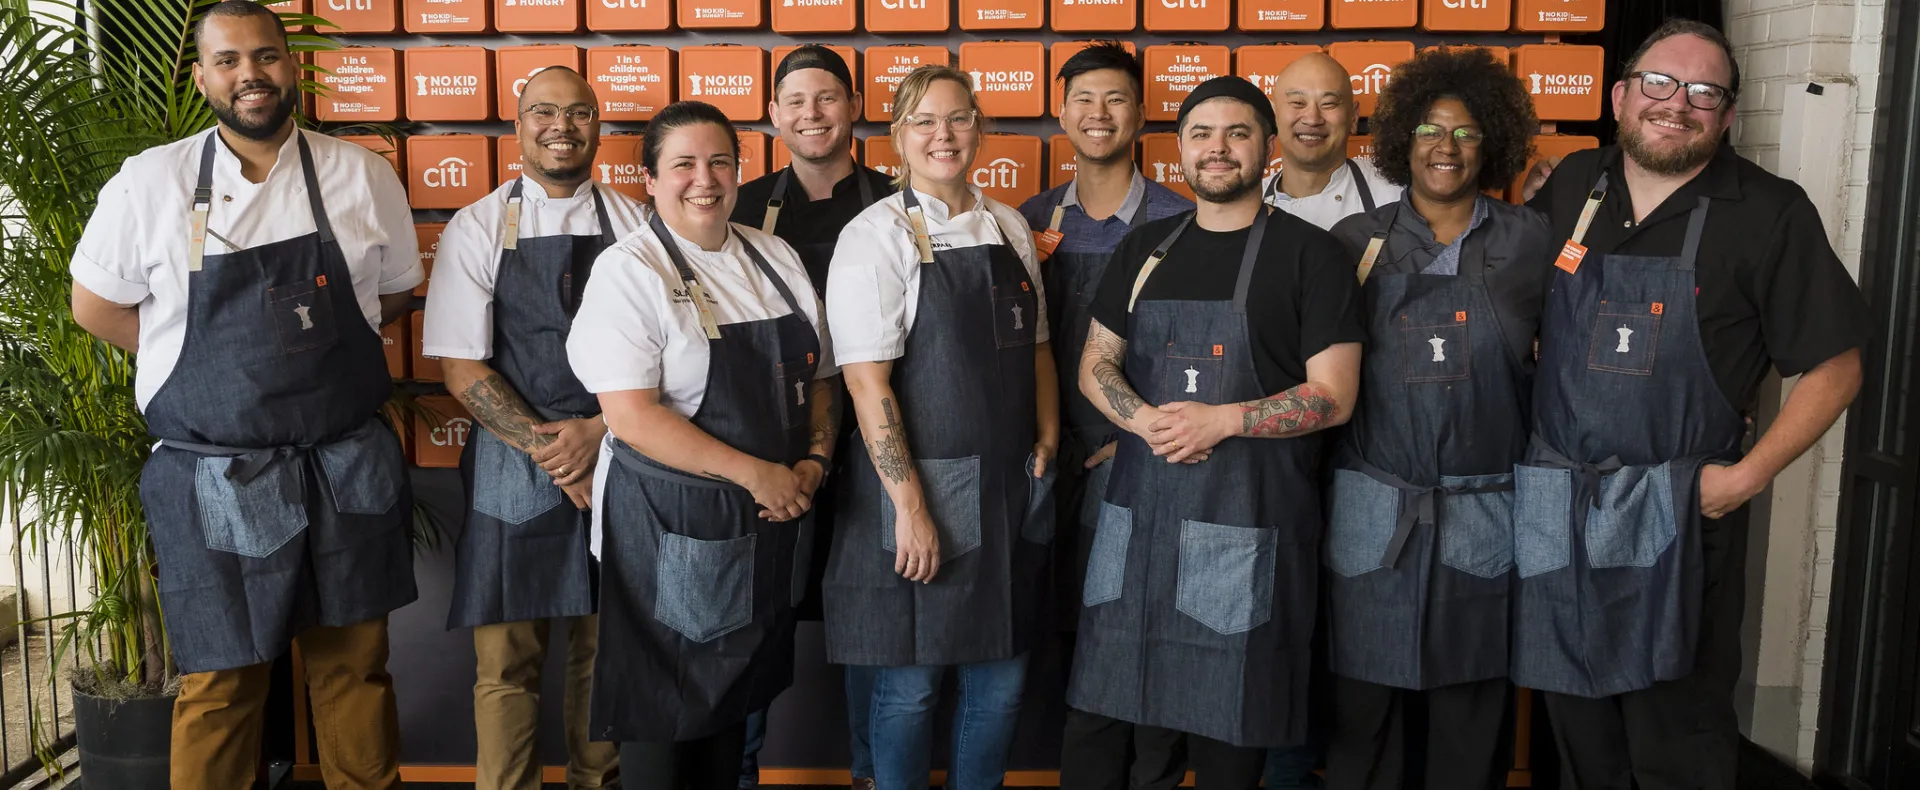 A group of prominent chefs pose for a group picture at a No Kid Hungry event